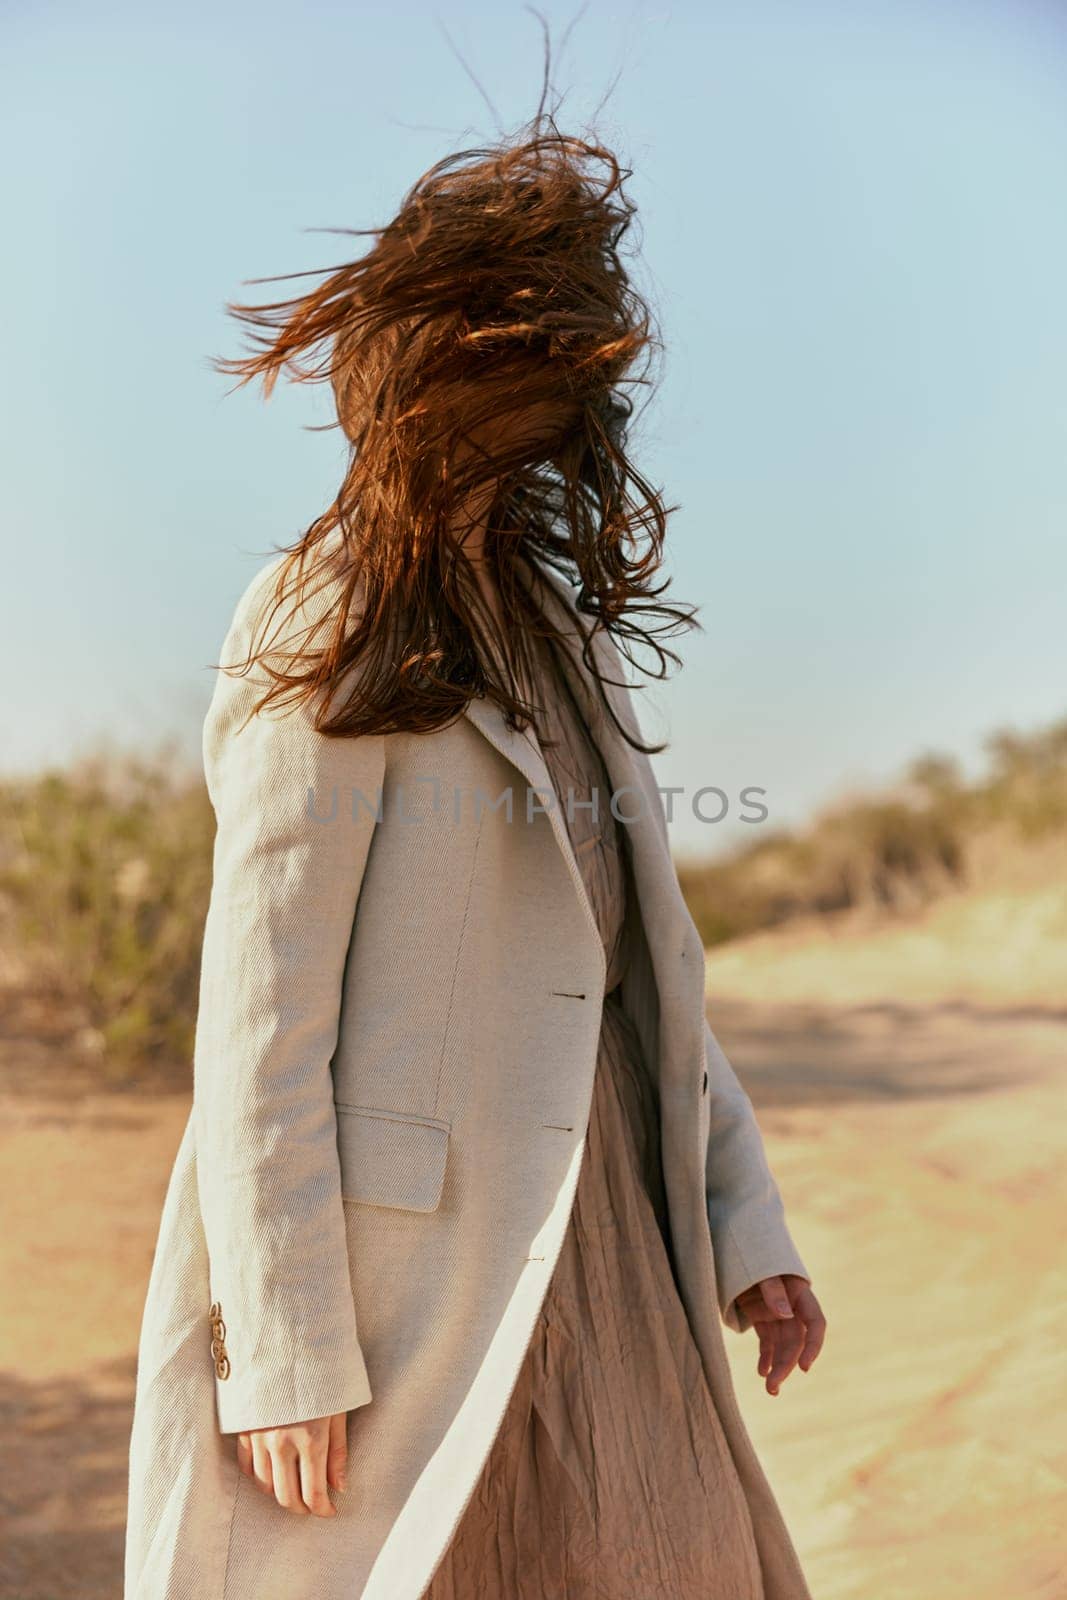 portrait of a woman in a light jacket with hair covering her face from the wind. High quality photo